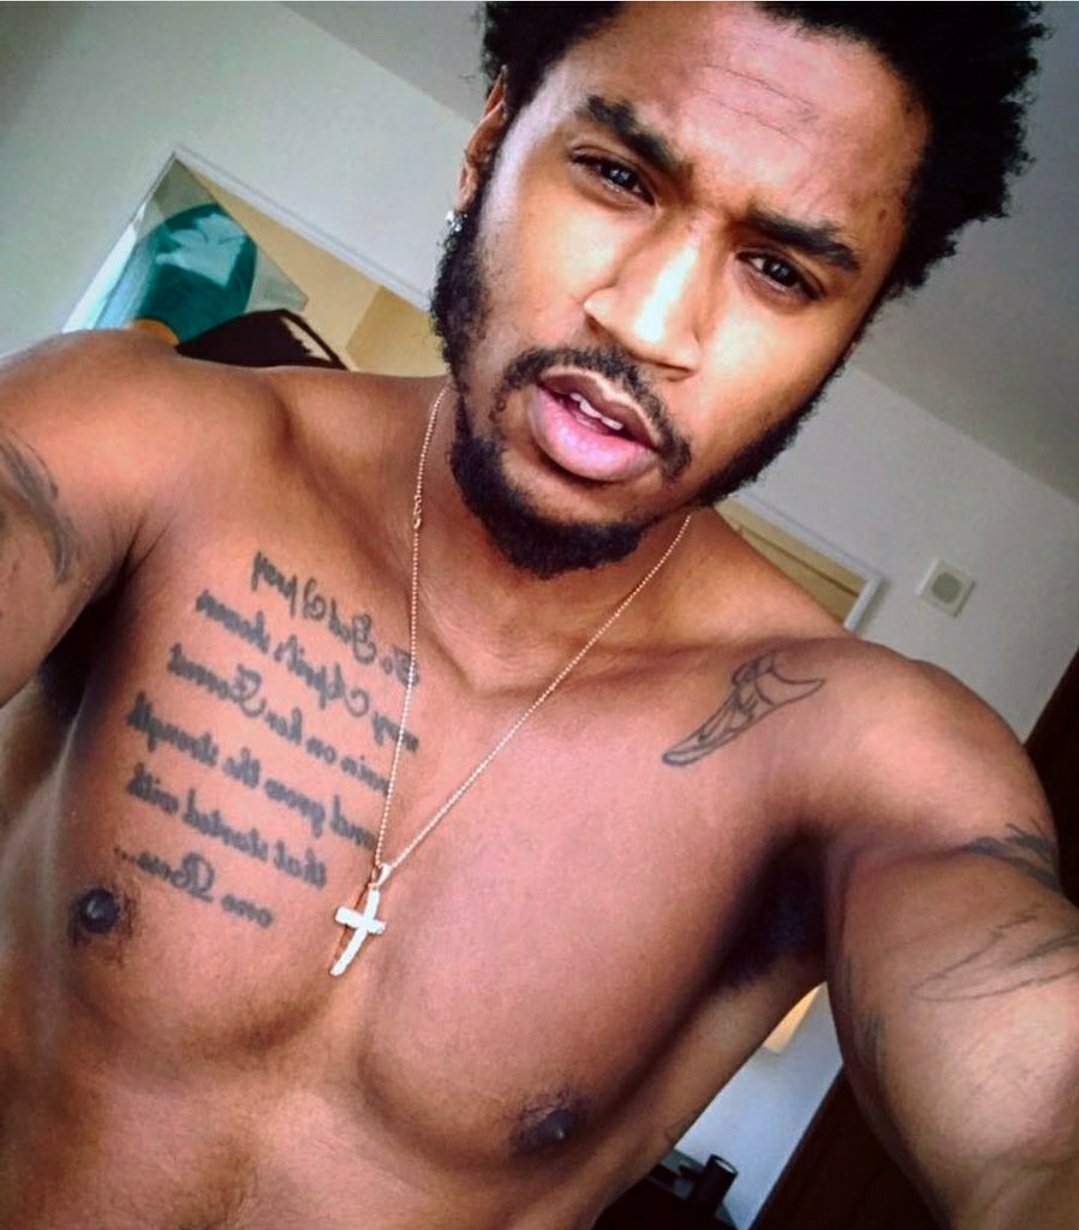 Trey Songz EXPLICIT Video of Him Getting "Serviced" Leaks Online/...